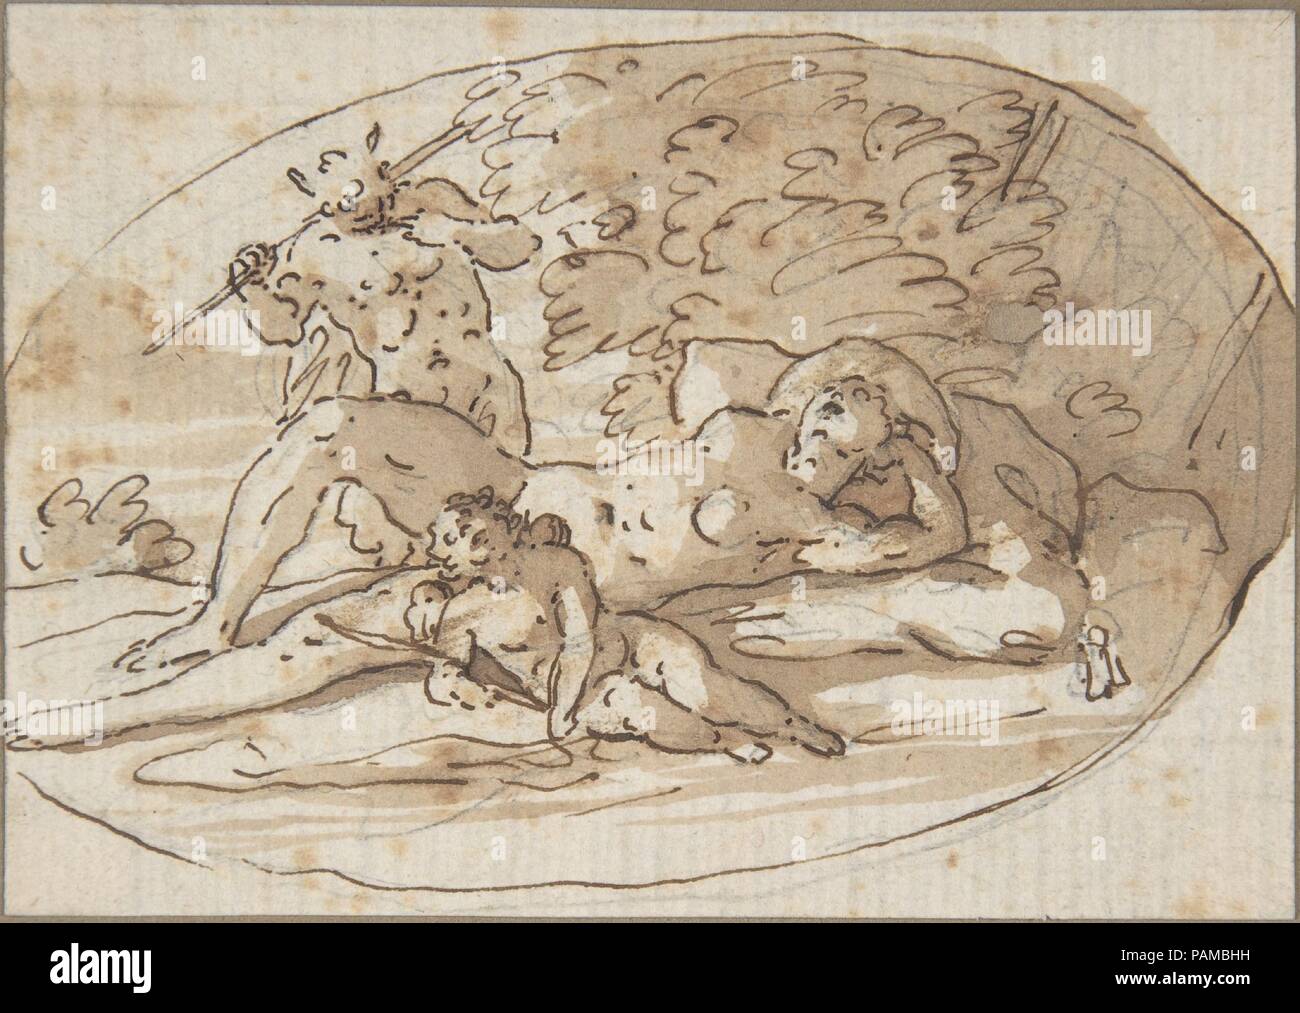 Design for a Vignette with a Nymph Surprised by a Satyr. Artist: Anonymous, French, 17th century. Dimensions: 2 5/8 x 4 in.  (6.7 x 10.2 cm) - oval shape. Date: second half 17th century. Museum: Metropolitan Museum of Art, New York, USA. Stock Photo